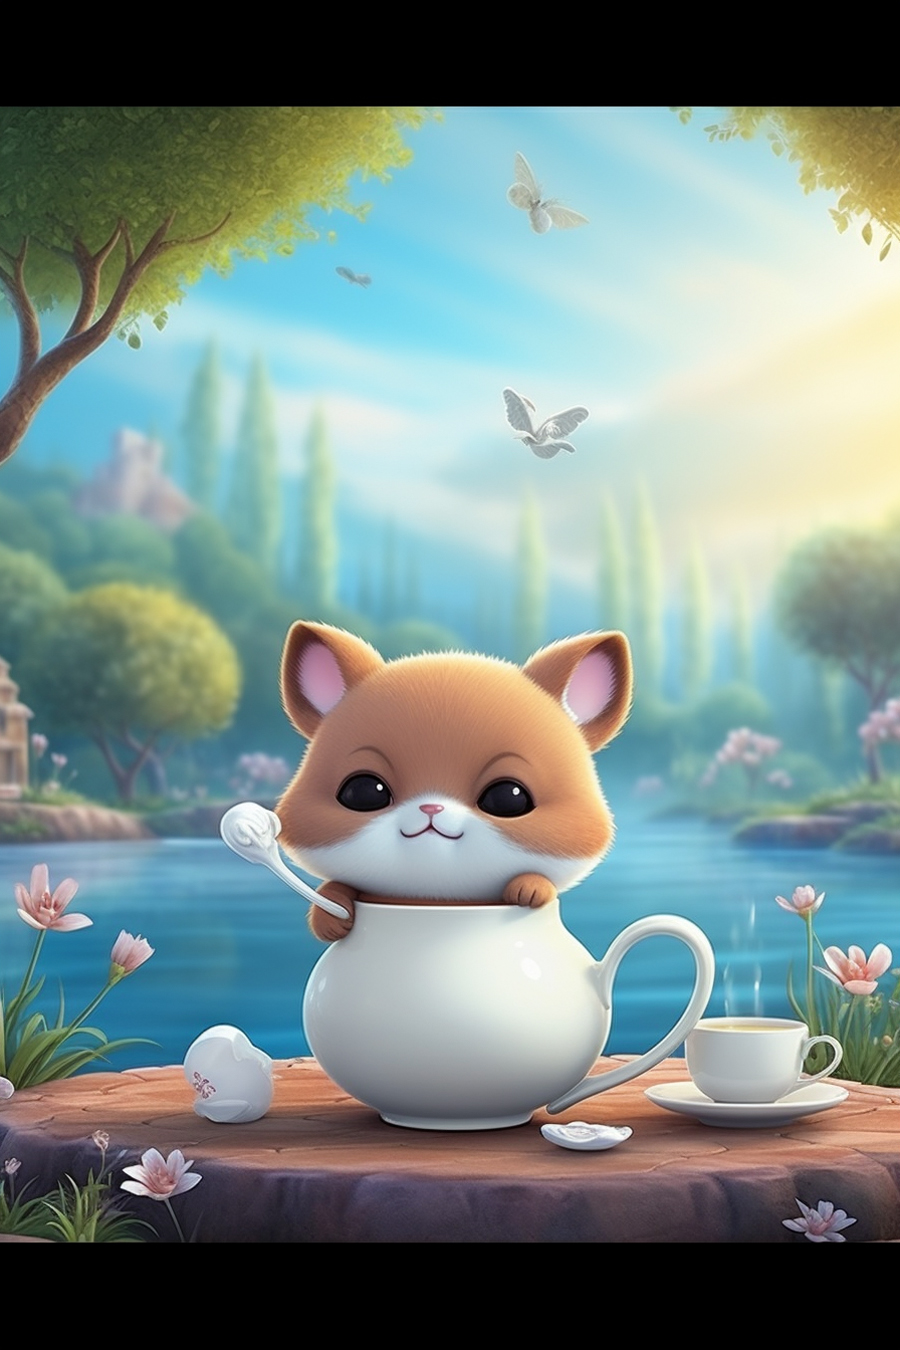 A cute kitty is sitting in a teacup on a wooden table.